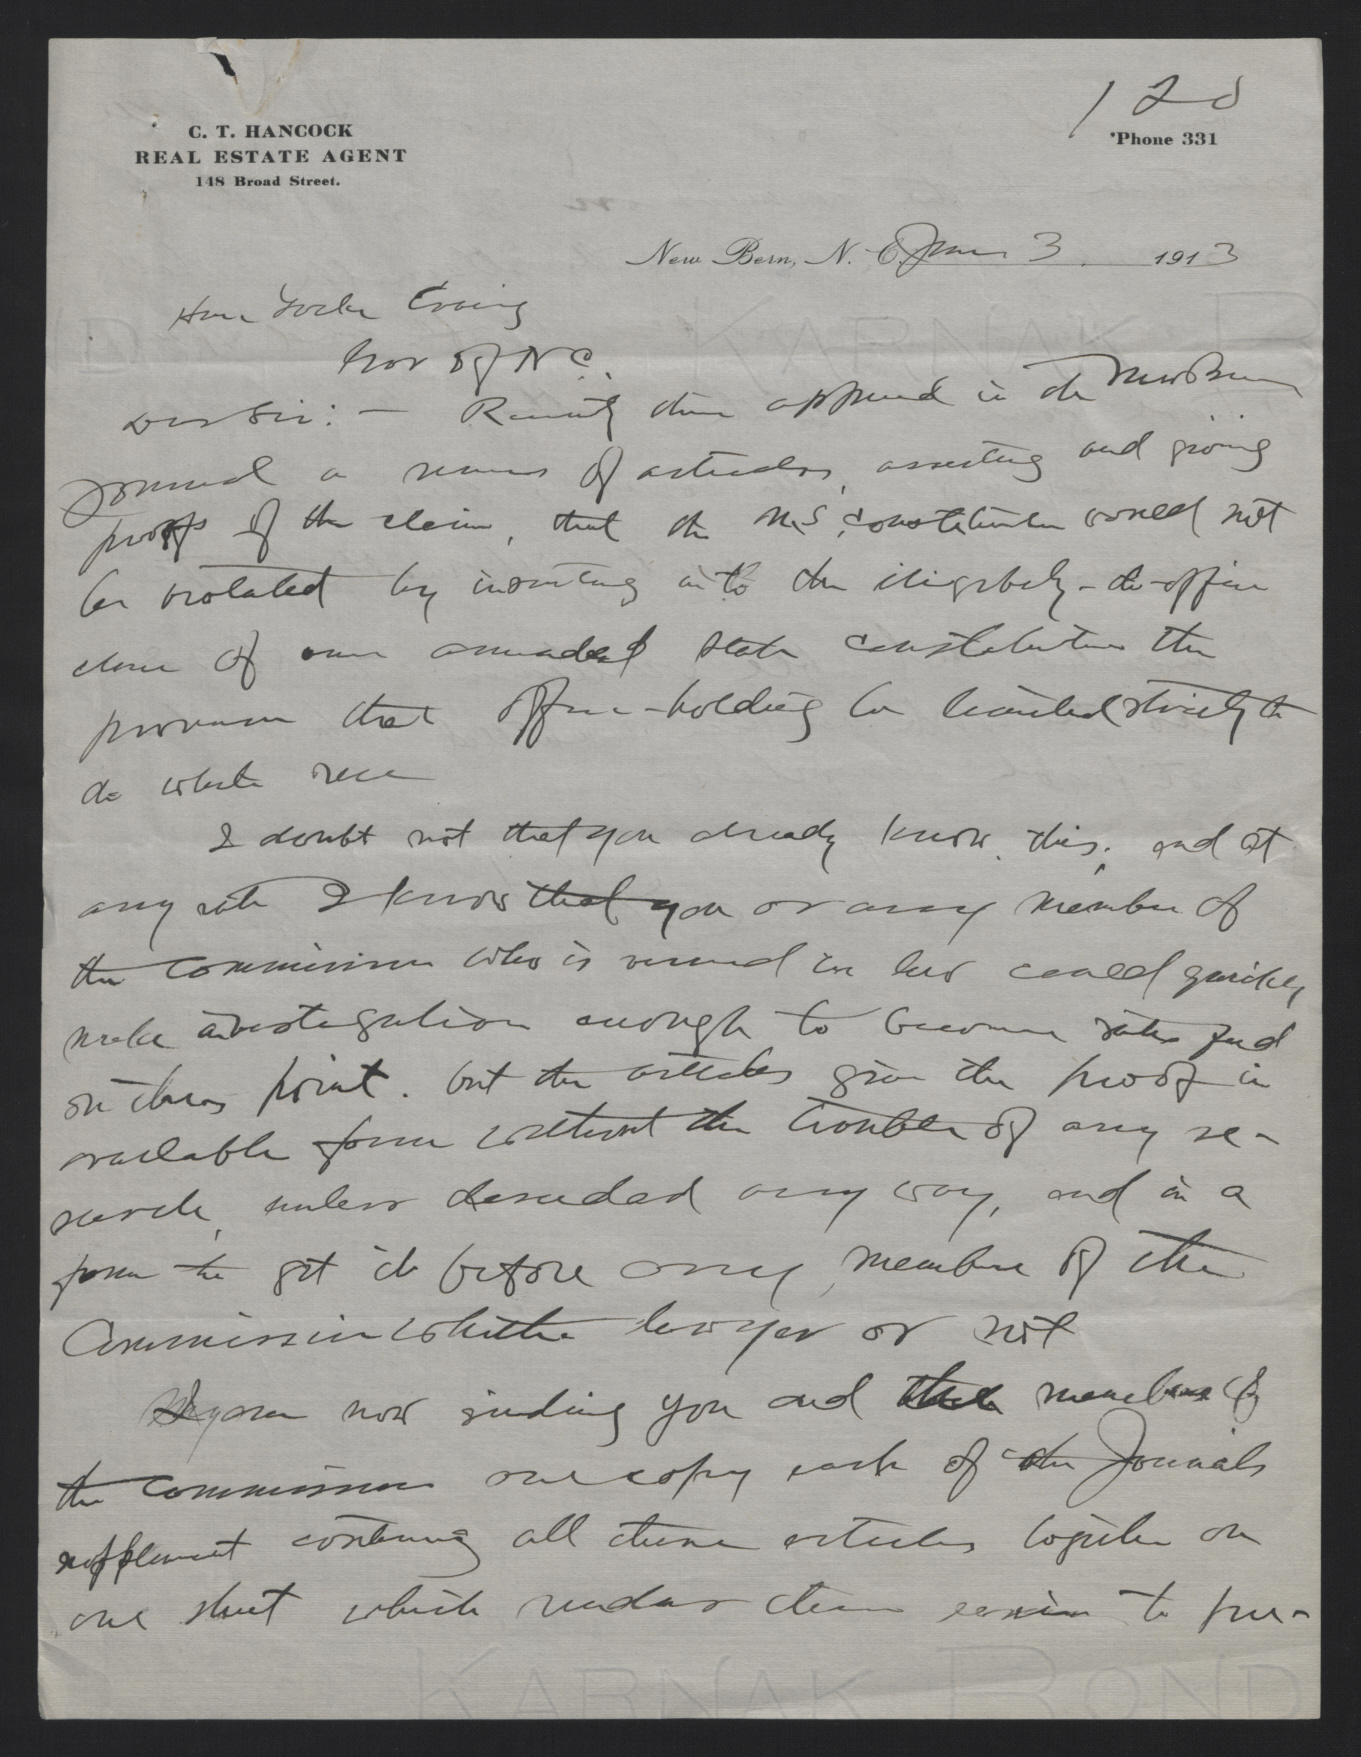 Letter from Hancock to Craig, January 3, 1913, page 1